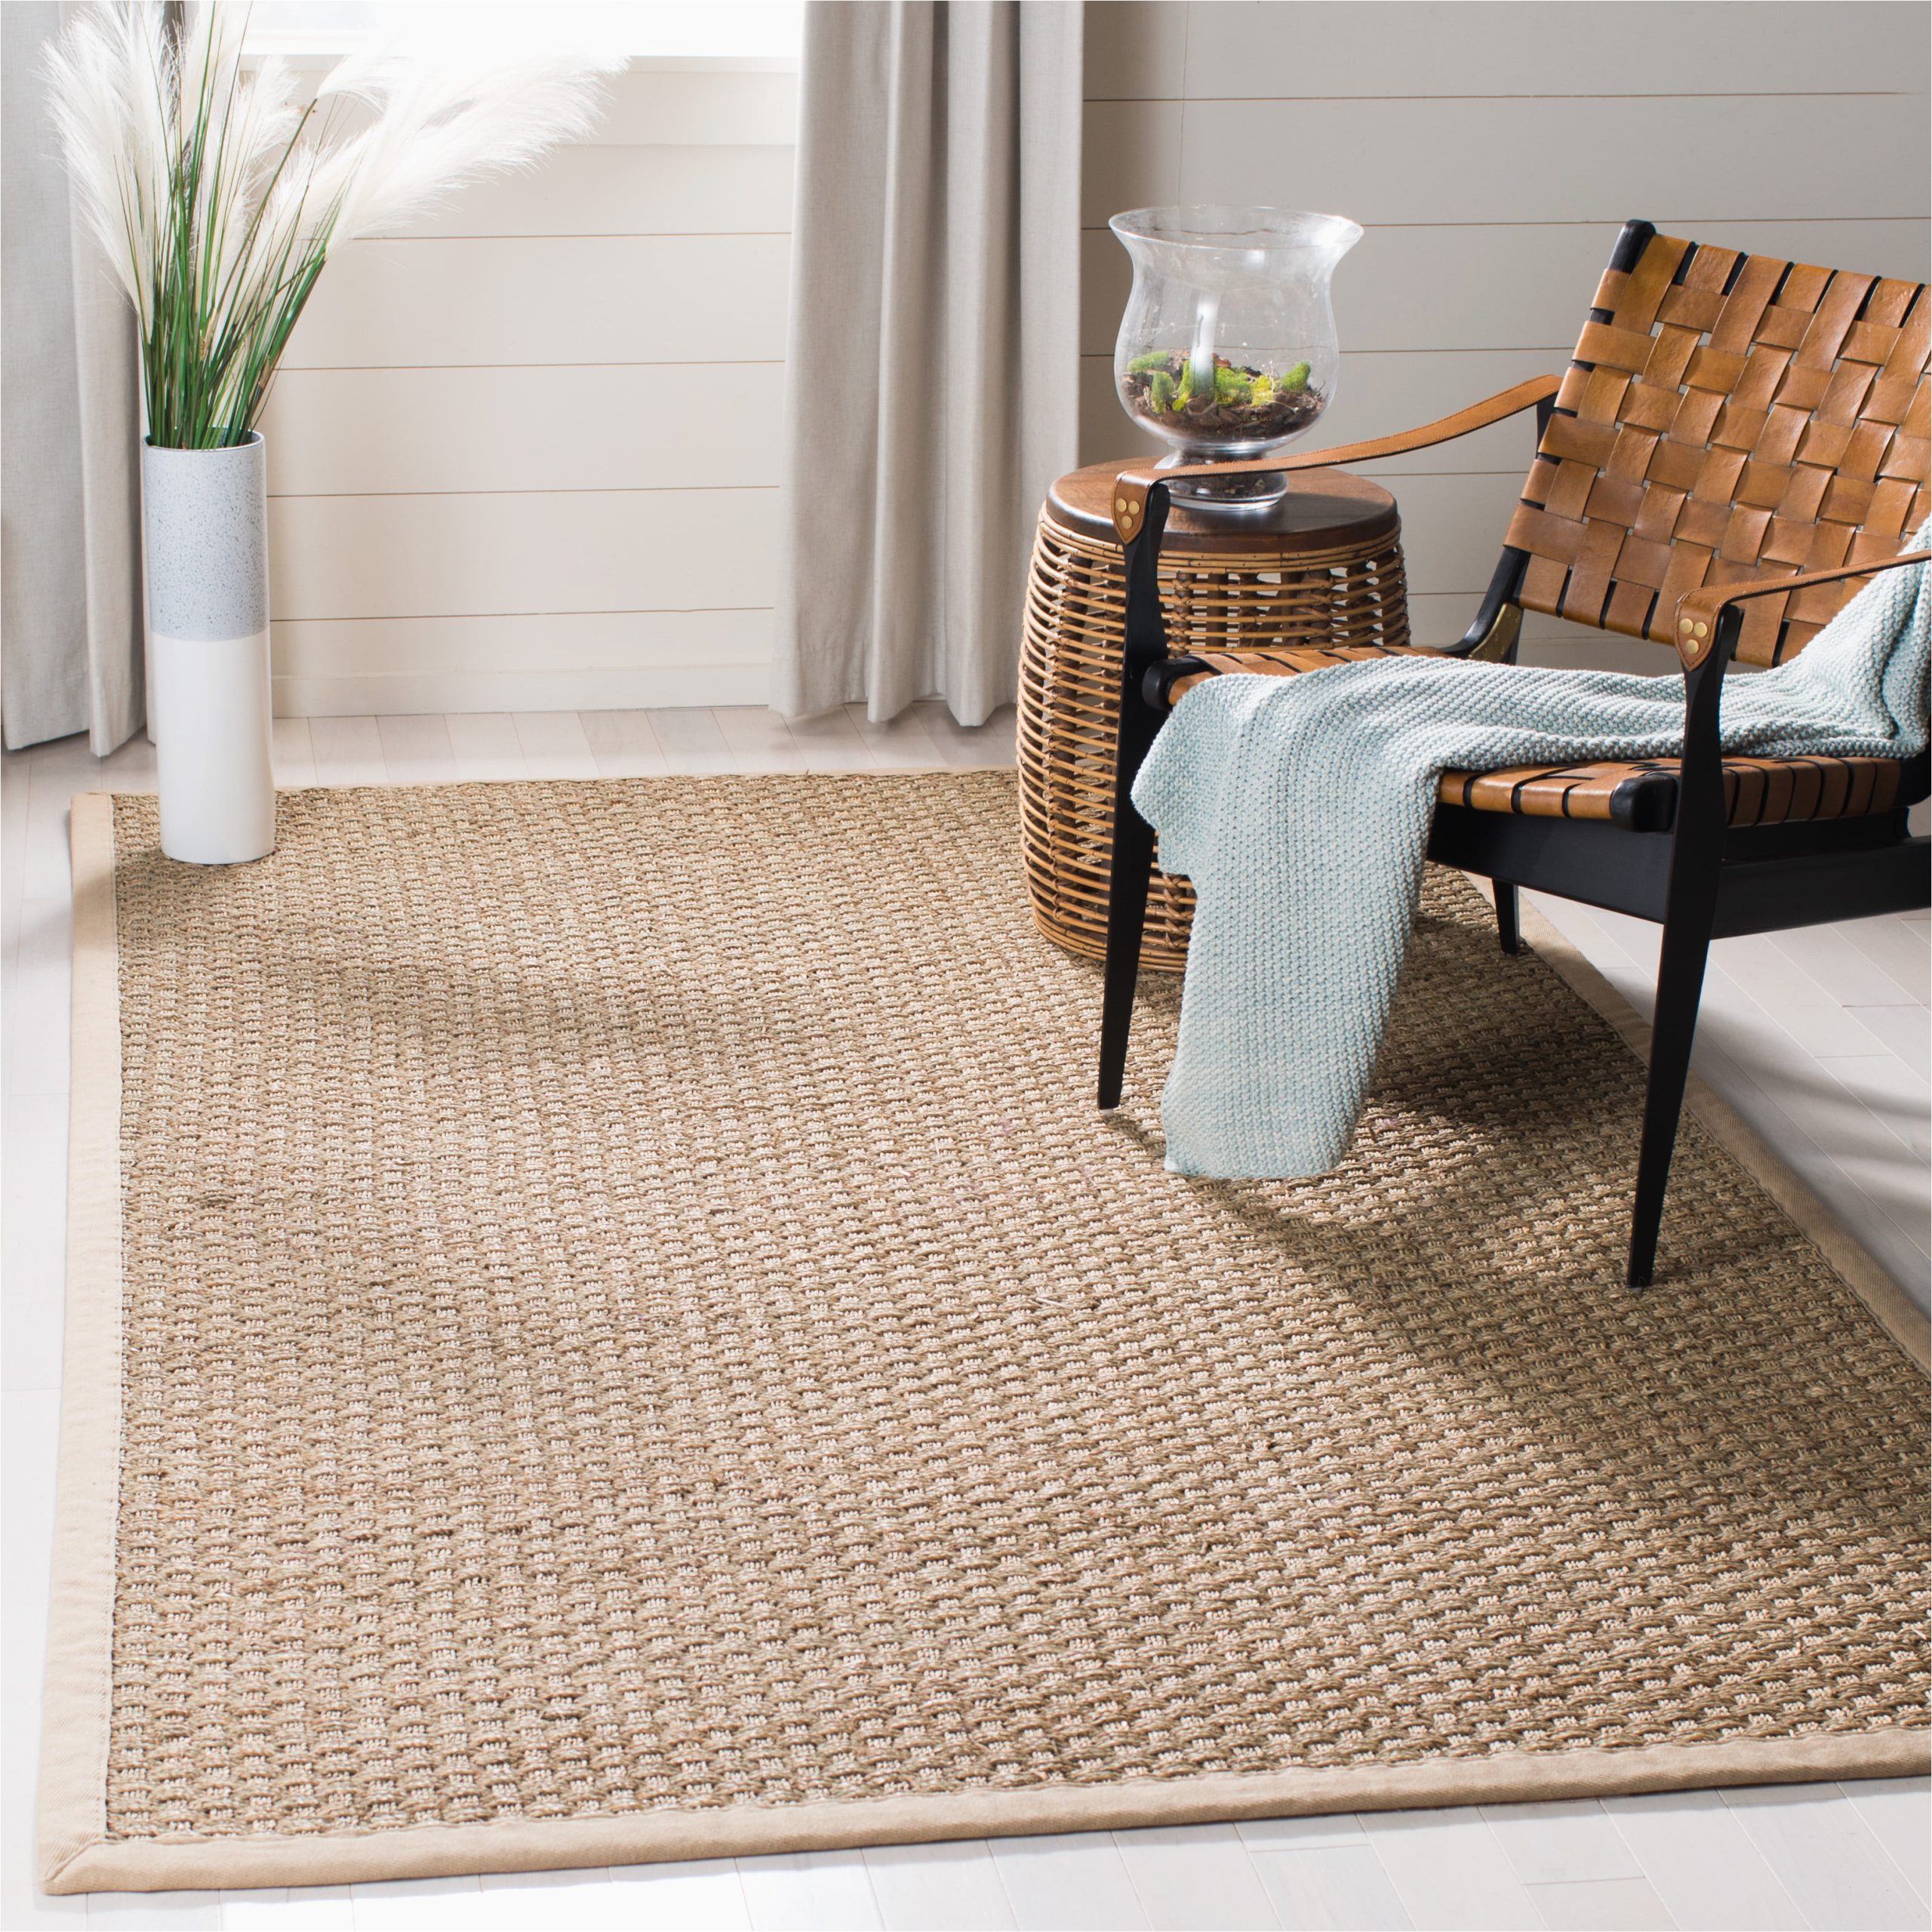 Solid Color area Rugs with Borders Safavieh Natural Fiber Arbor Border area Rug, Natural/beige, 2′ X 3′